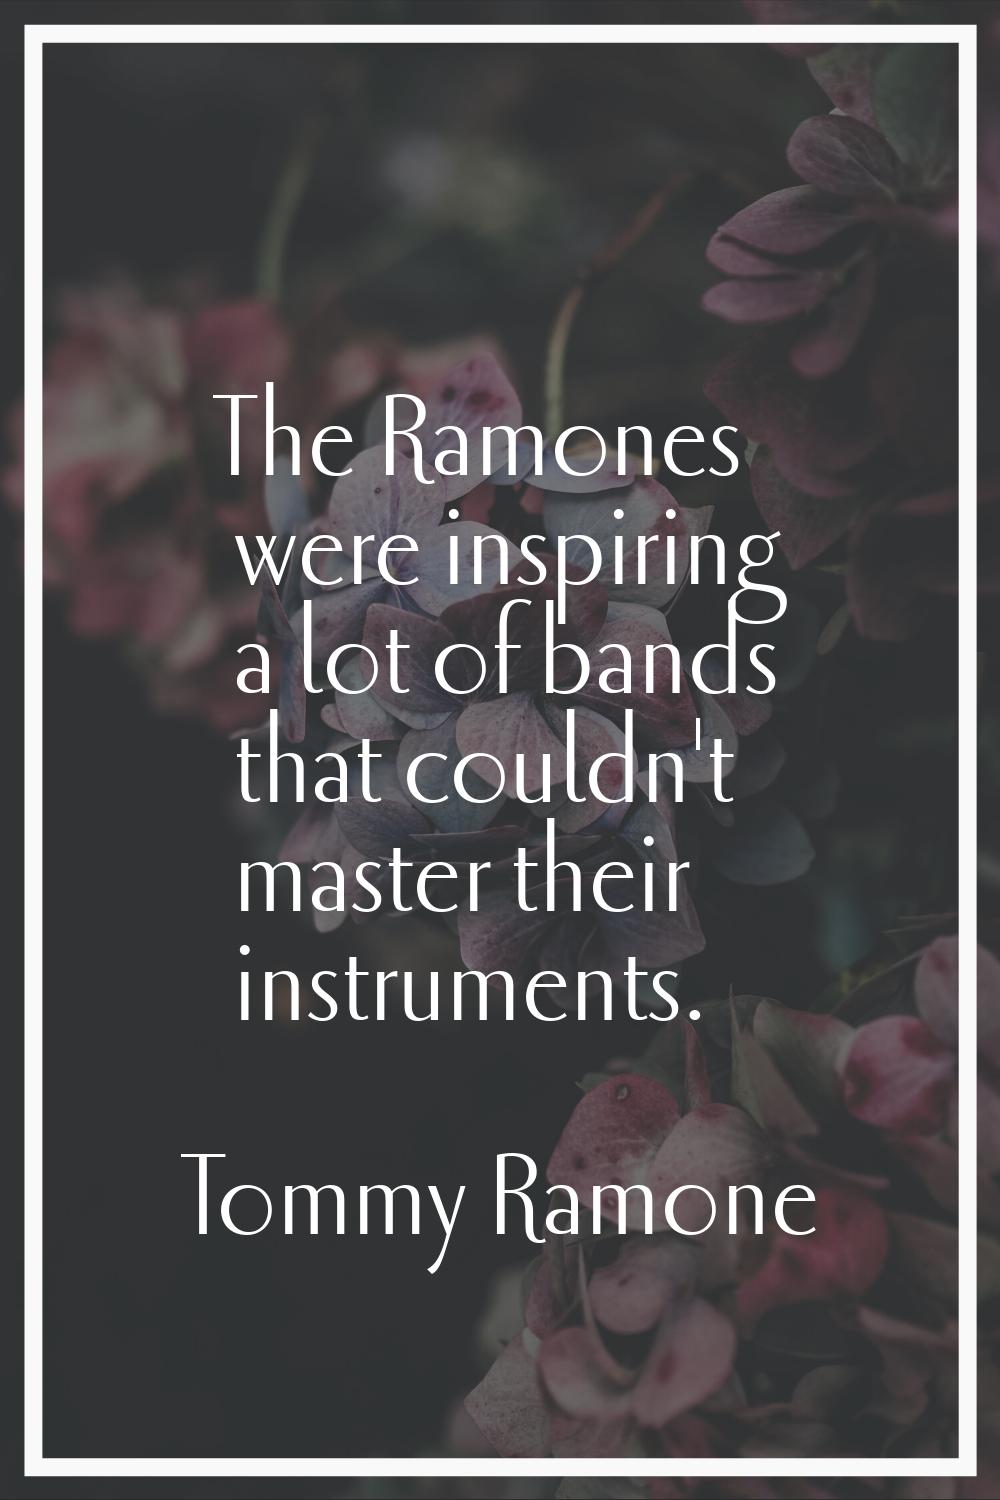 The Ramones were inspiring a lot of bands that couldn't master their instruments.